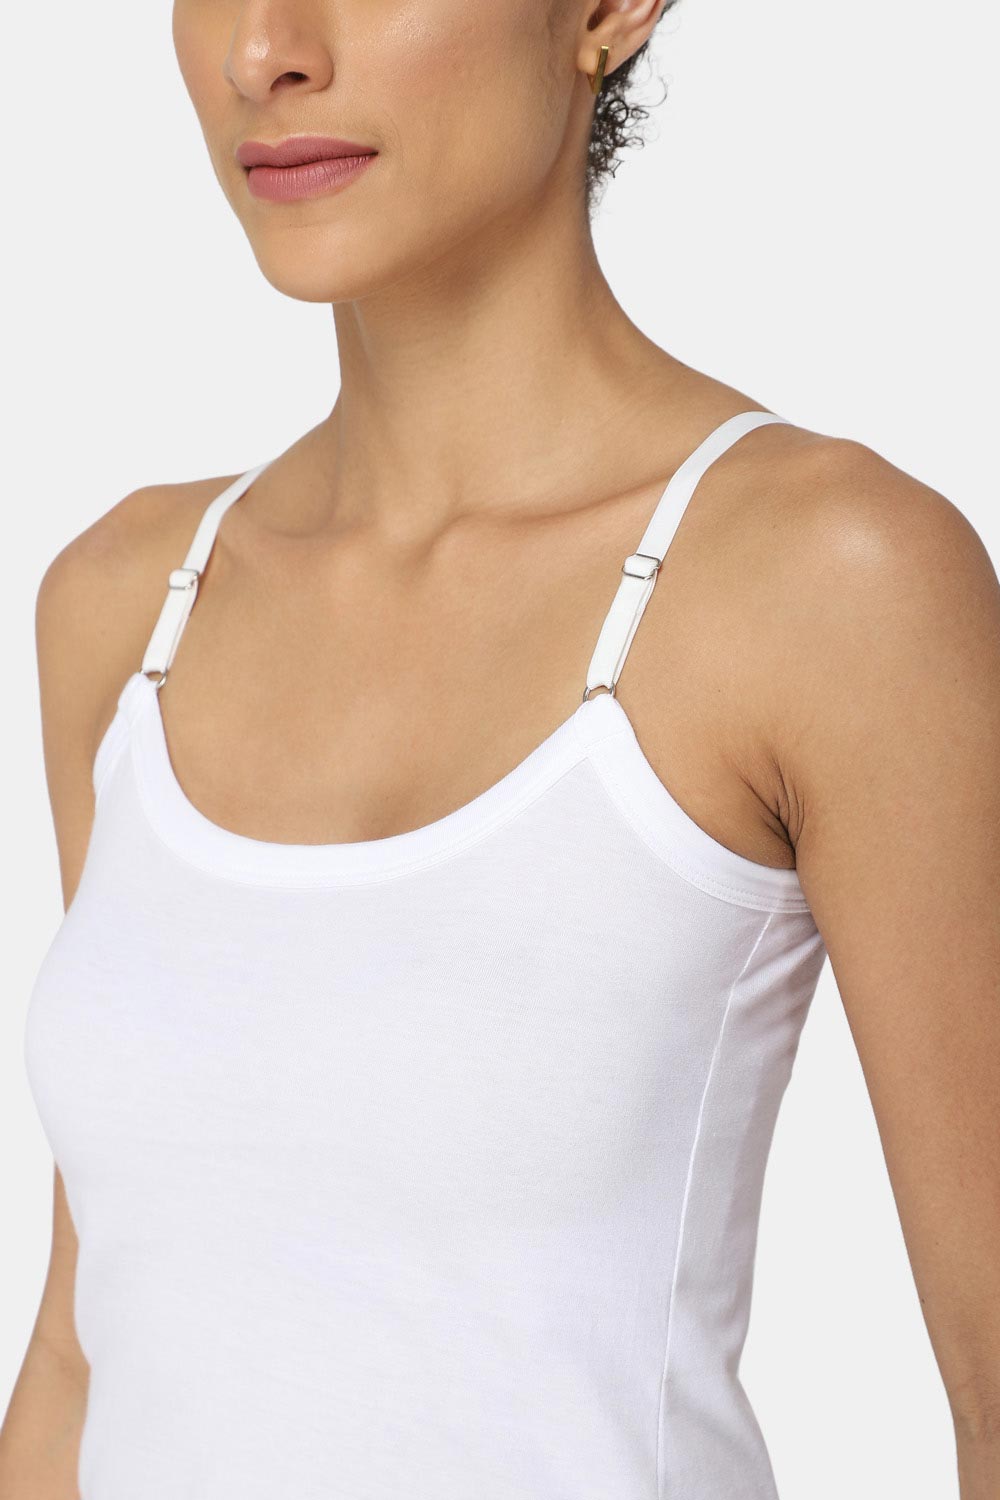 Intimacy Camisole-Slip Special Combo Pack - In05 - Pack of 3 - C56